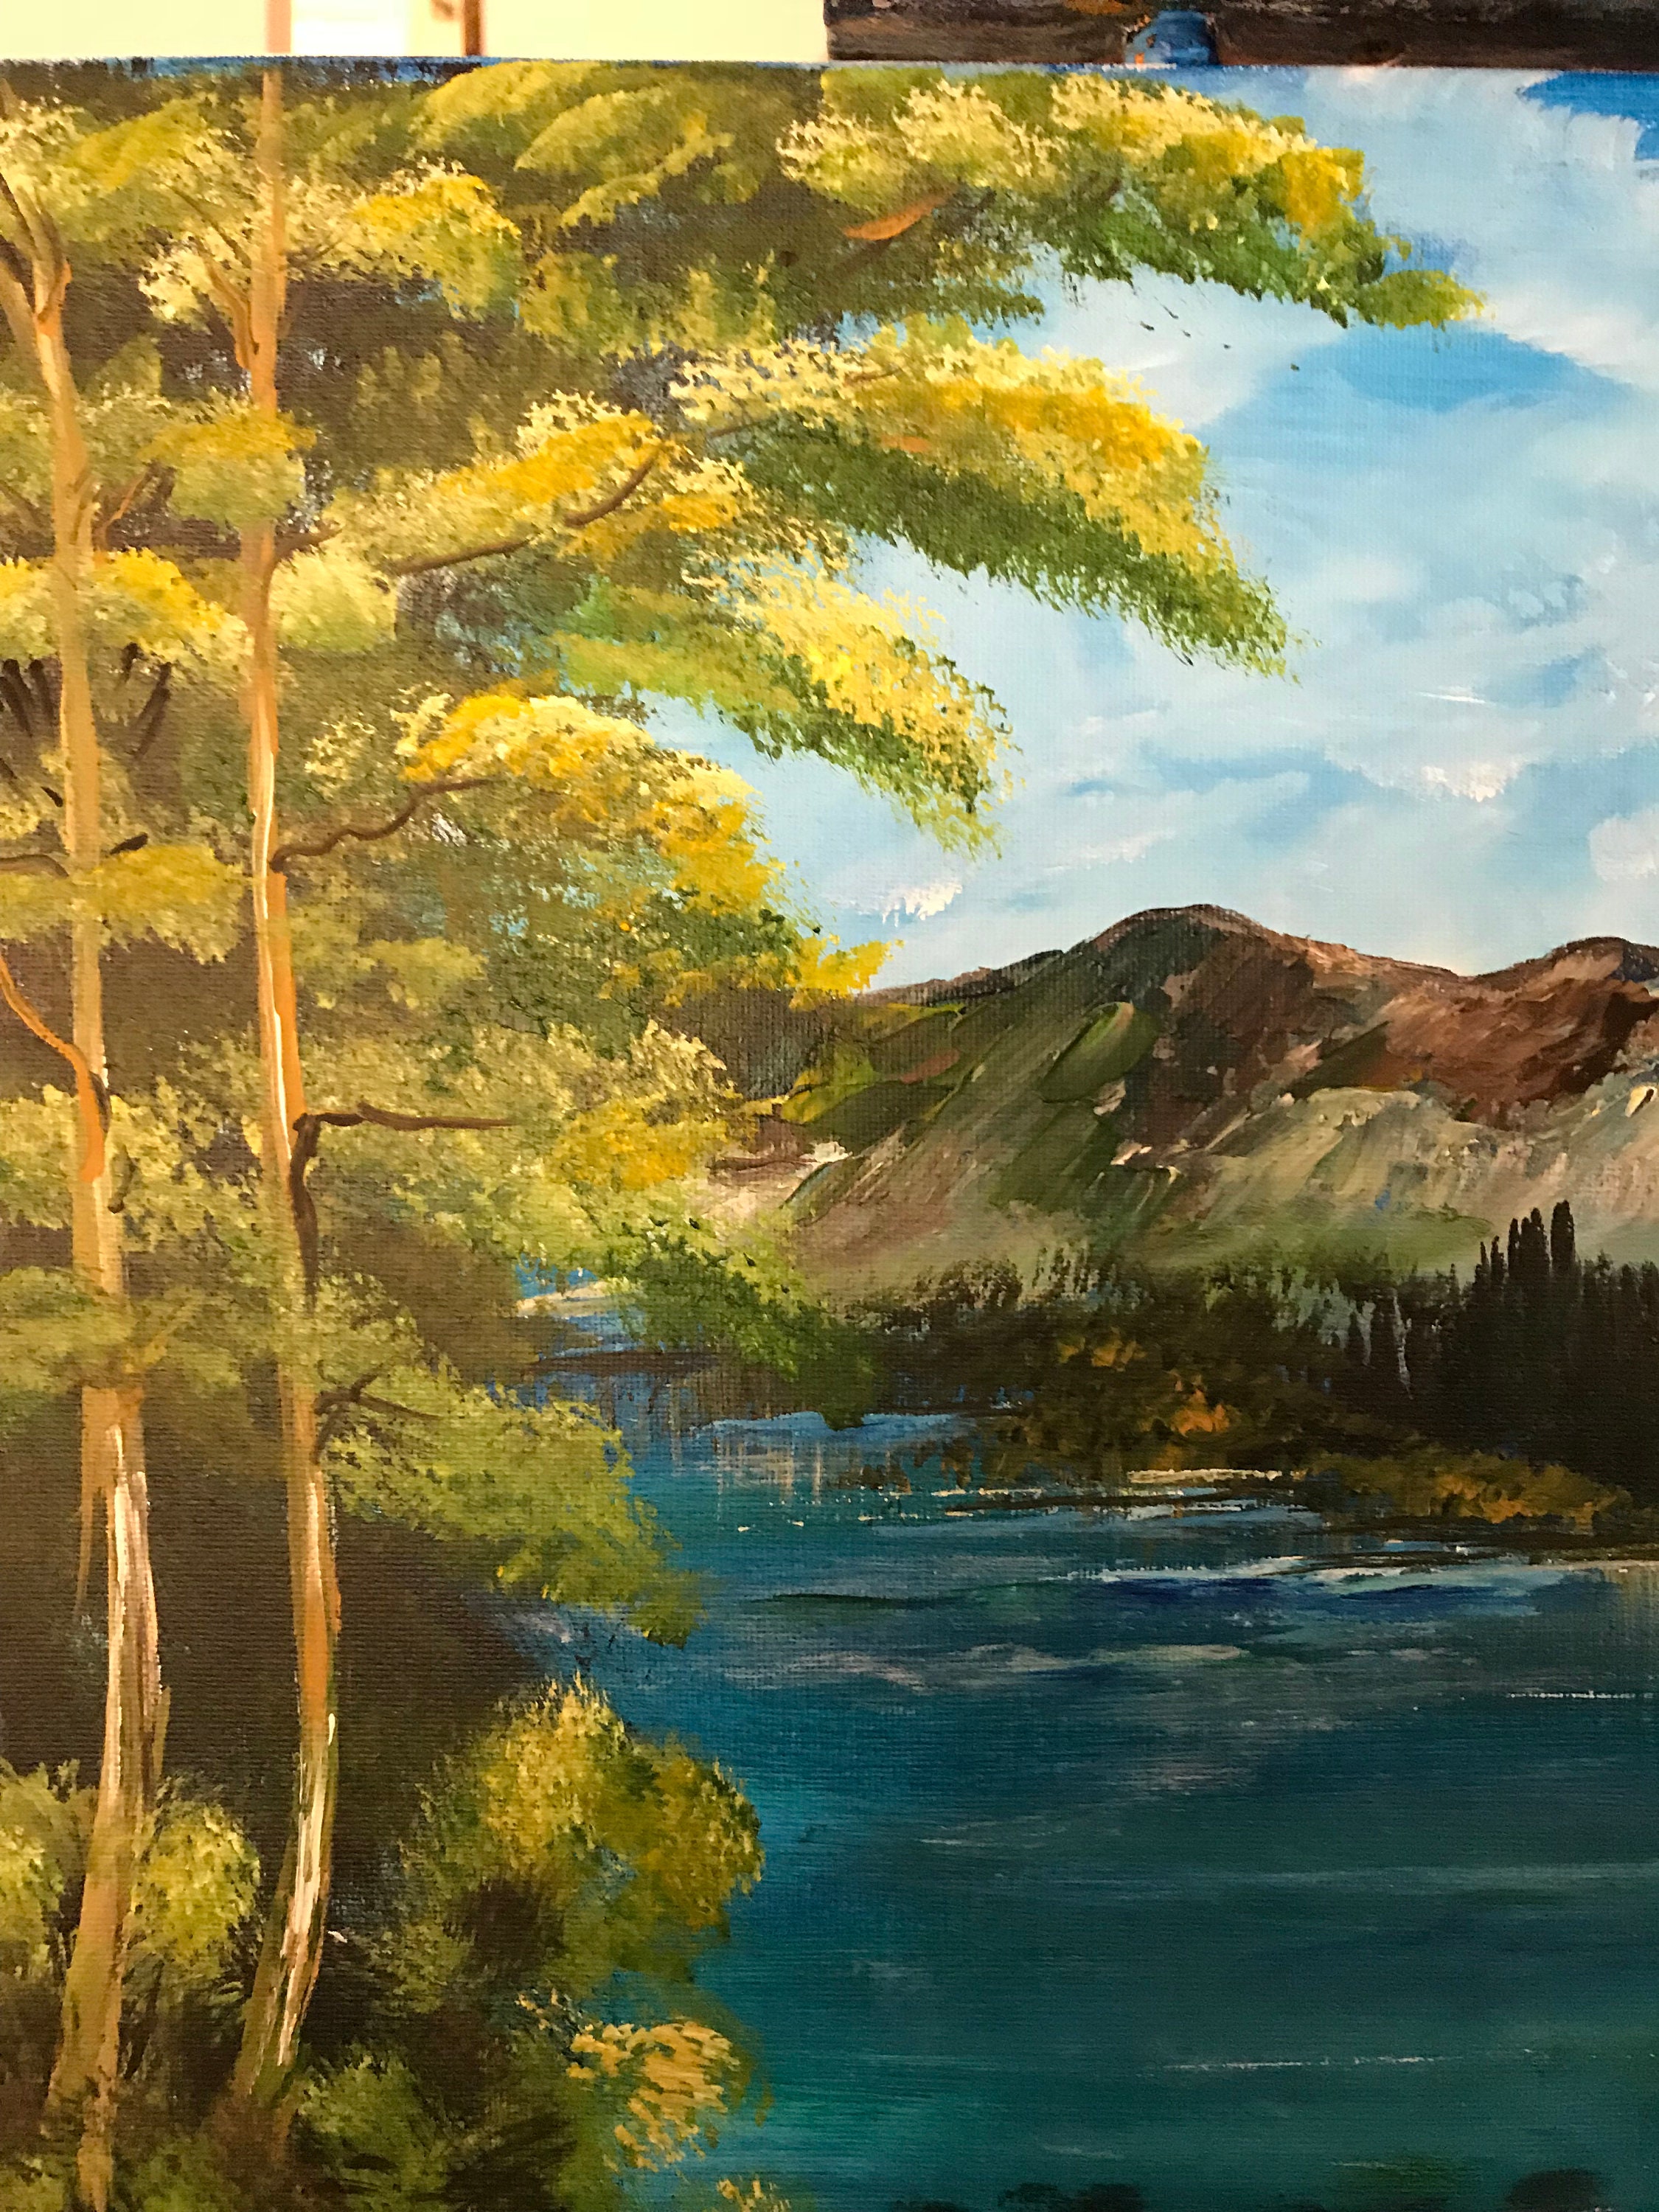 Lakeside Scene Overlooking A Rocky Mountain Range Bob Ross Replica,  Handmade Painting on Stretched Canvas 16x20 